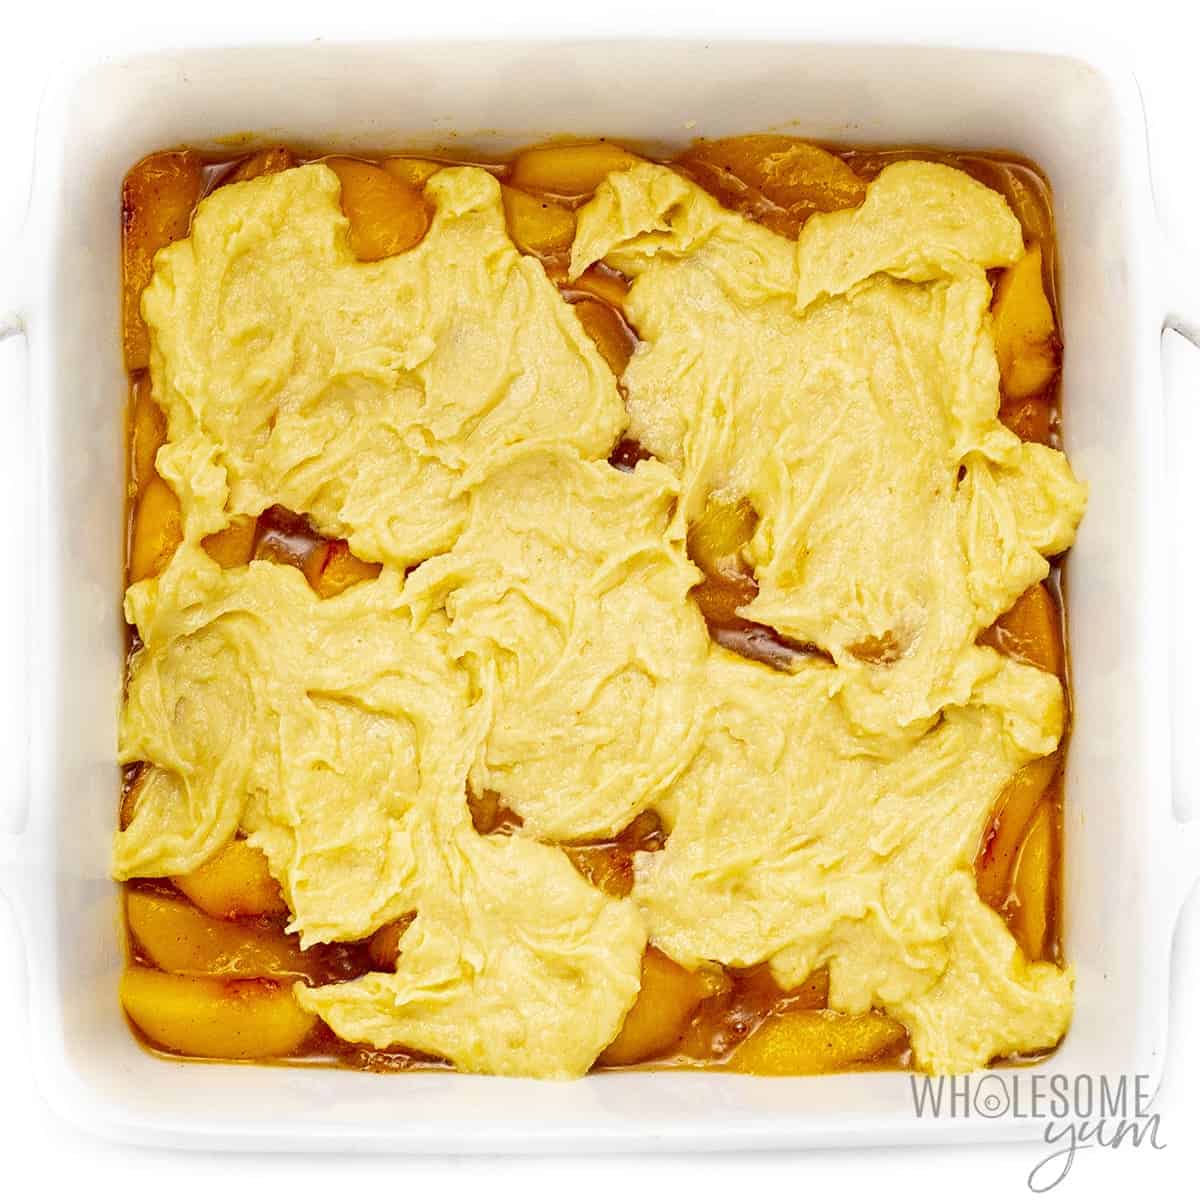 Healthy peach cobbler with batter spooned on top.